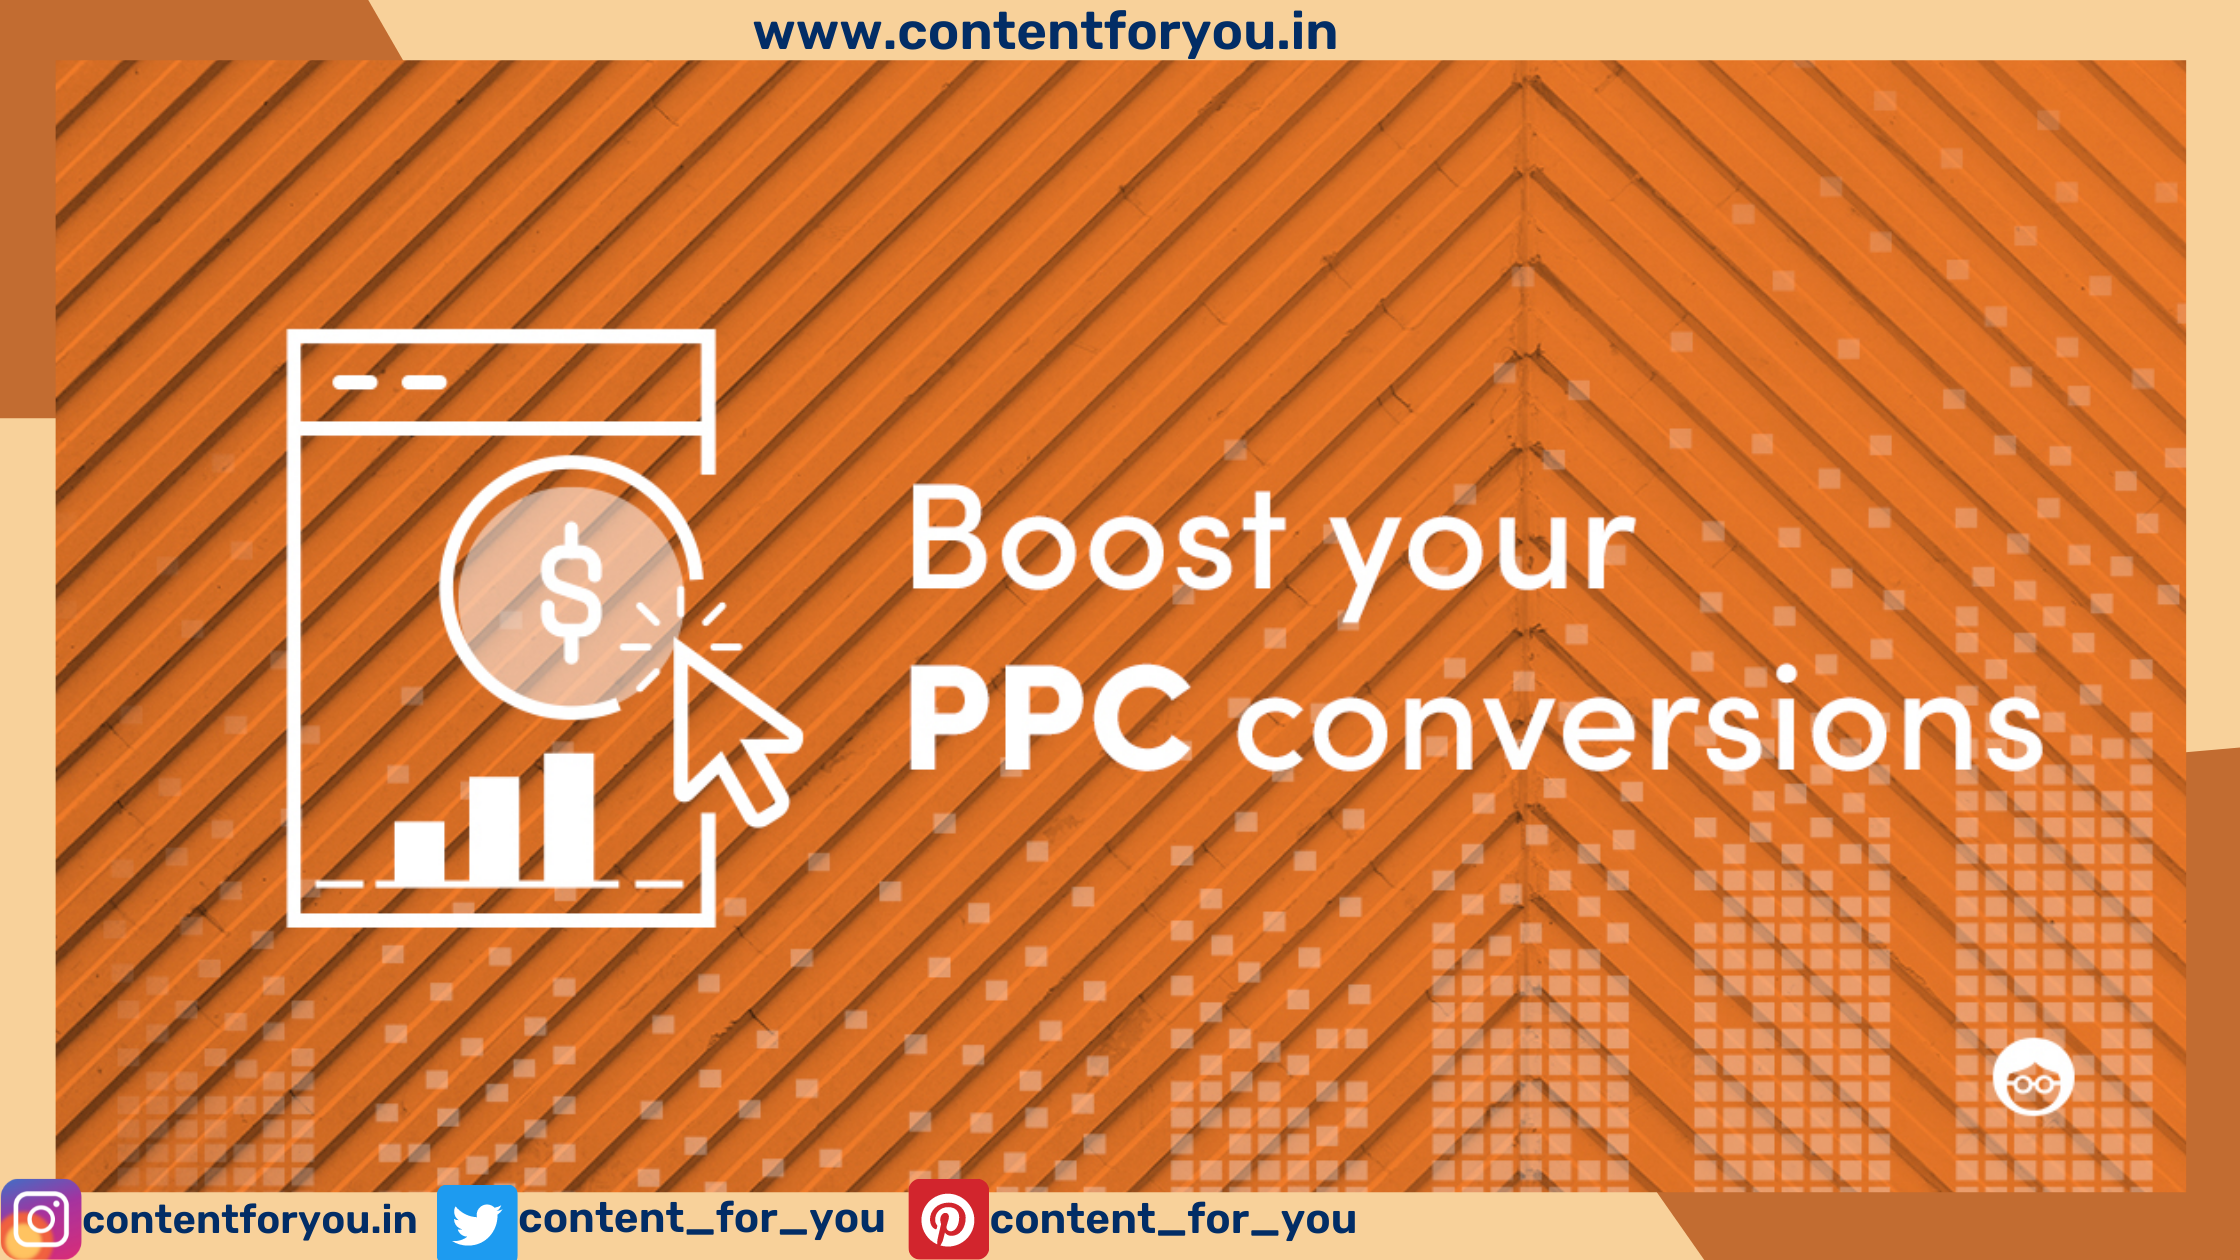 optimize conversion rates for PPC